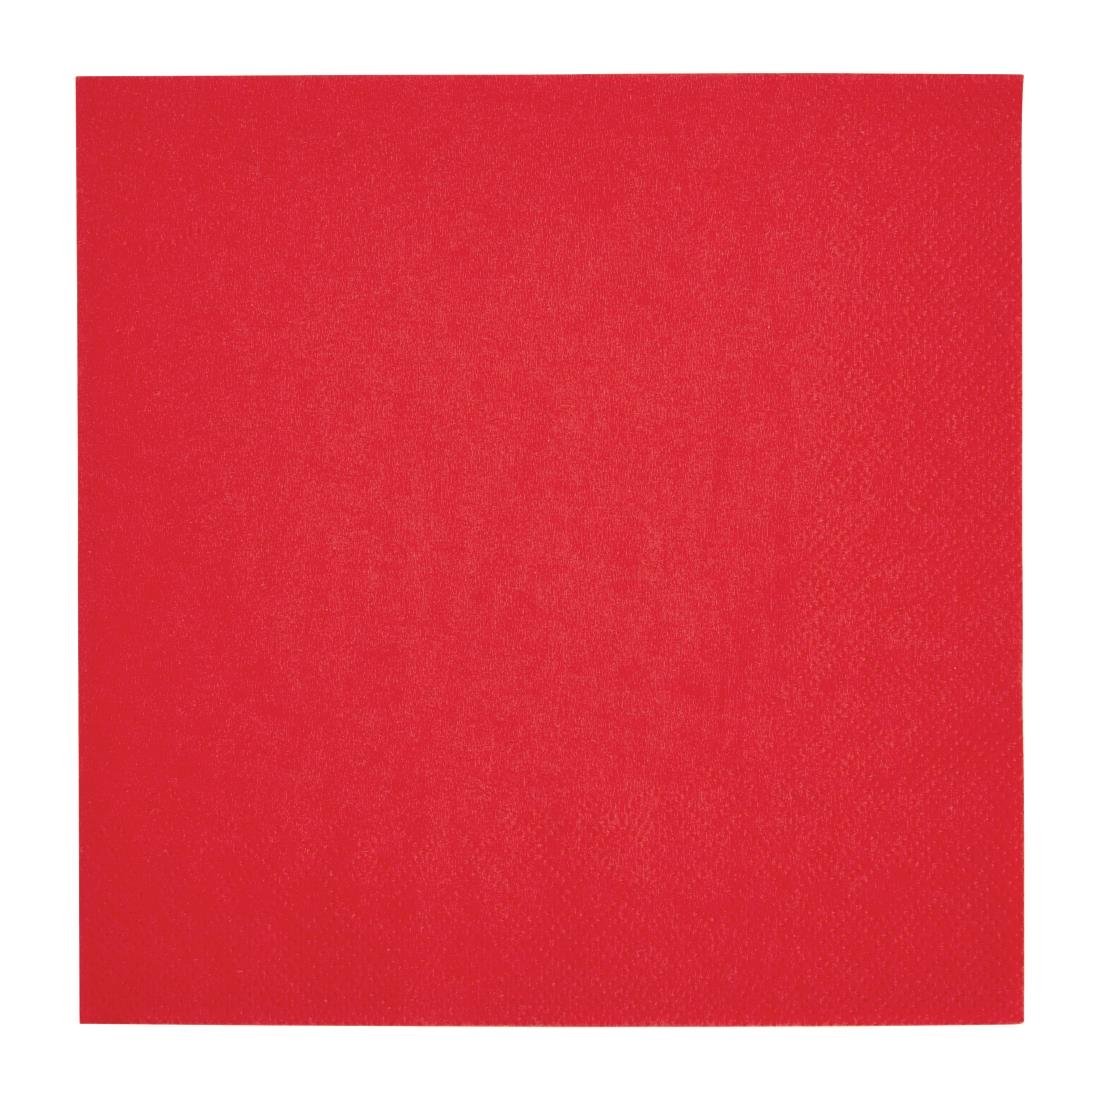 Fiesta Lunch Napkins Red 330mm (Pack of 2000)